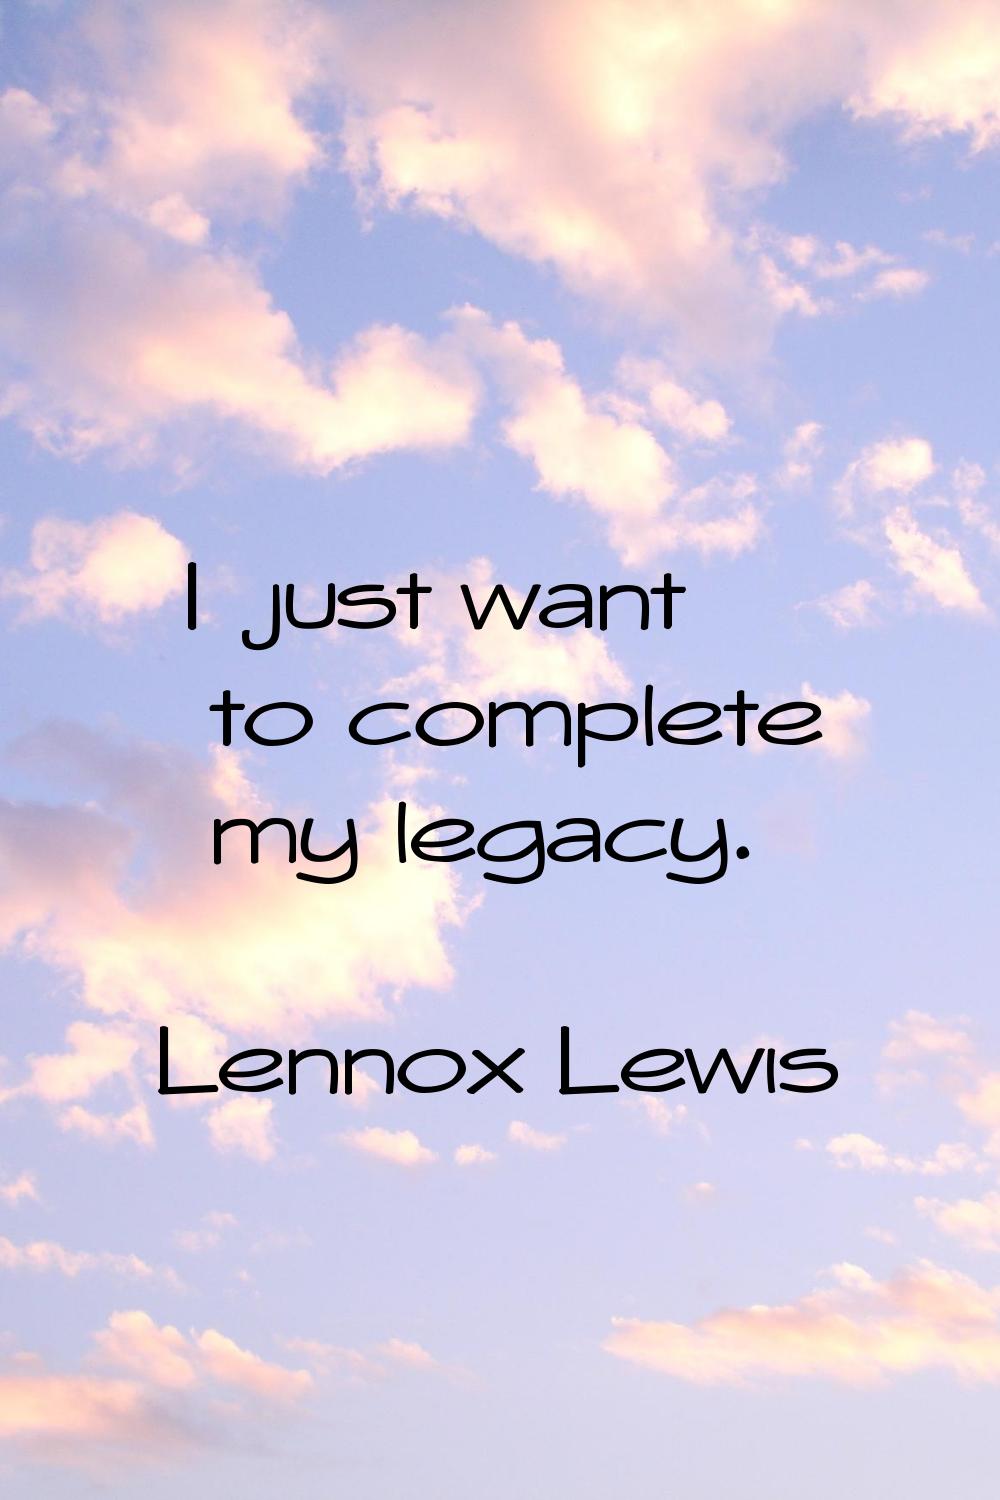 I just want to complete my legacy.